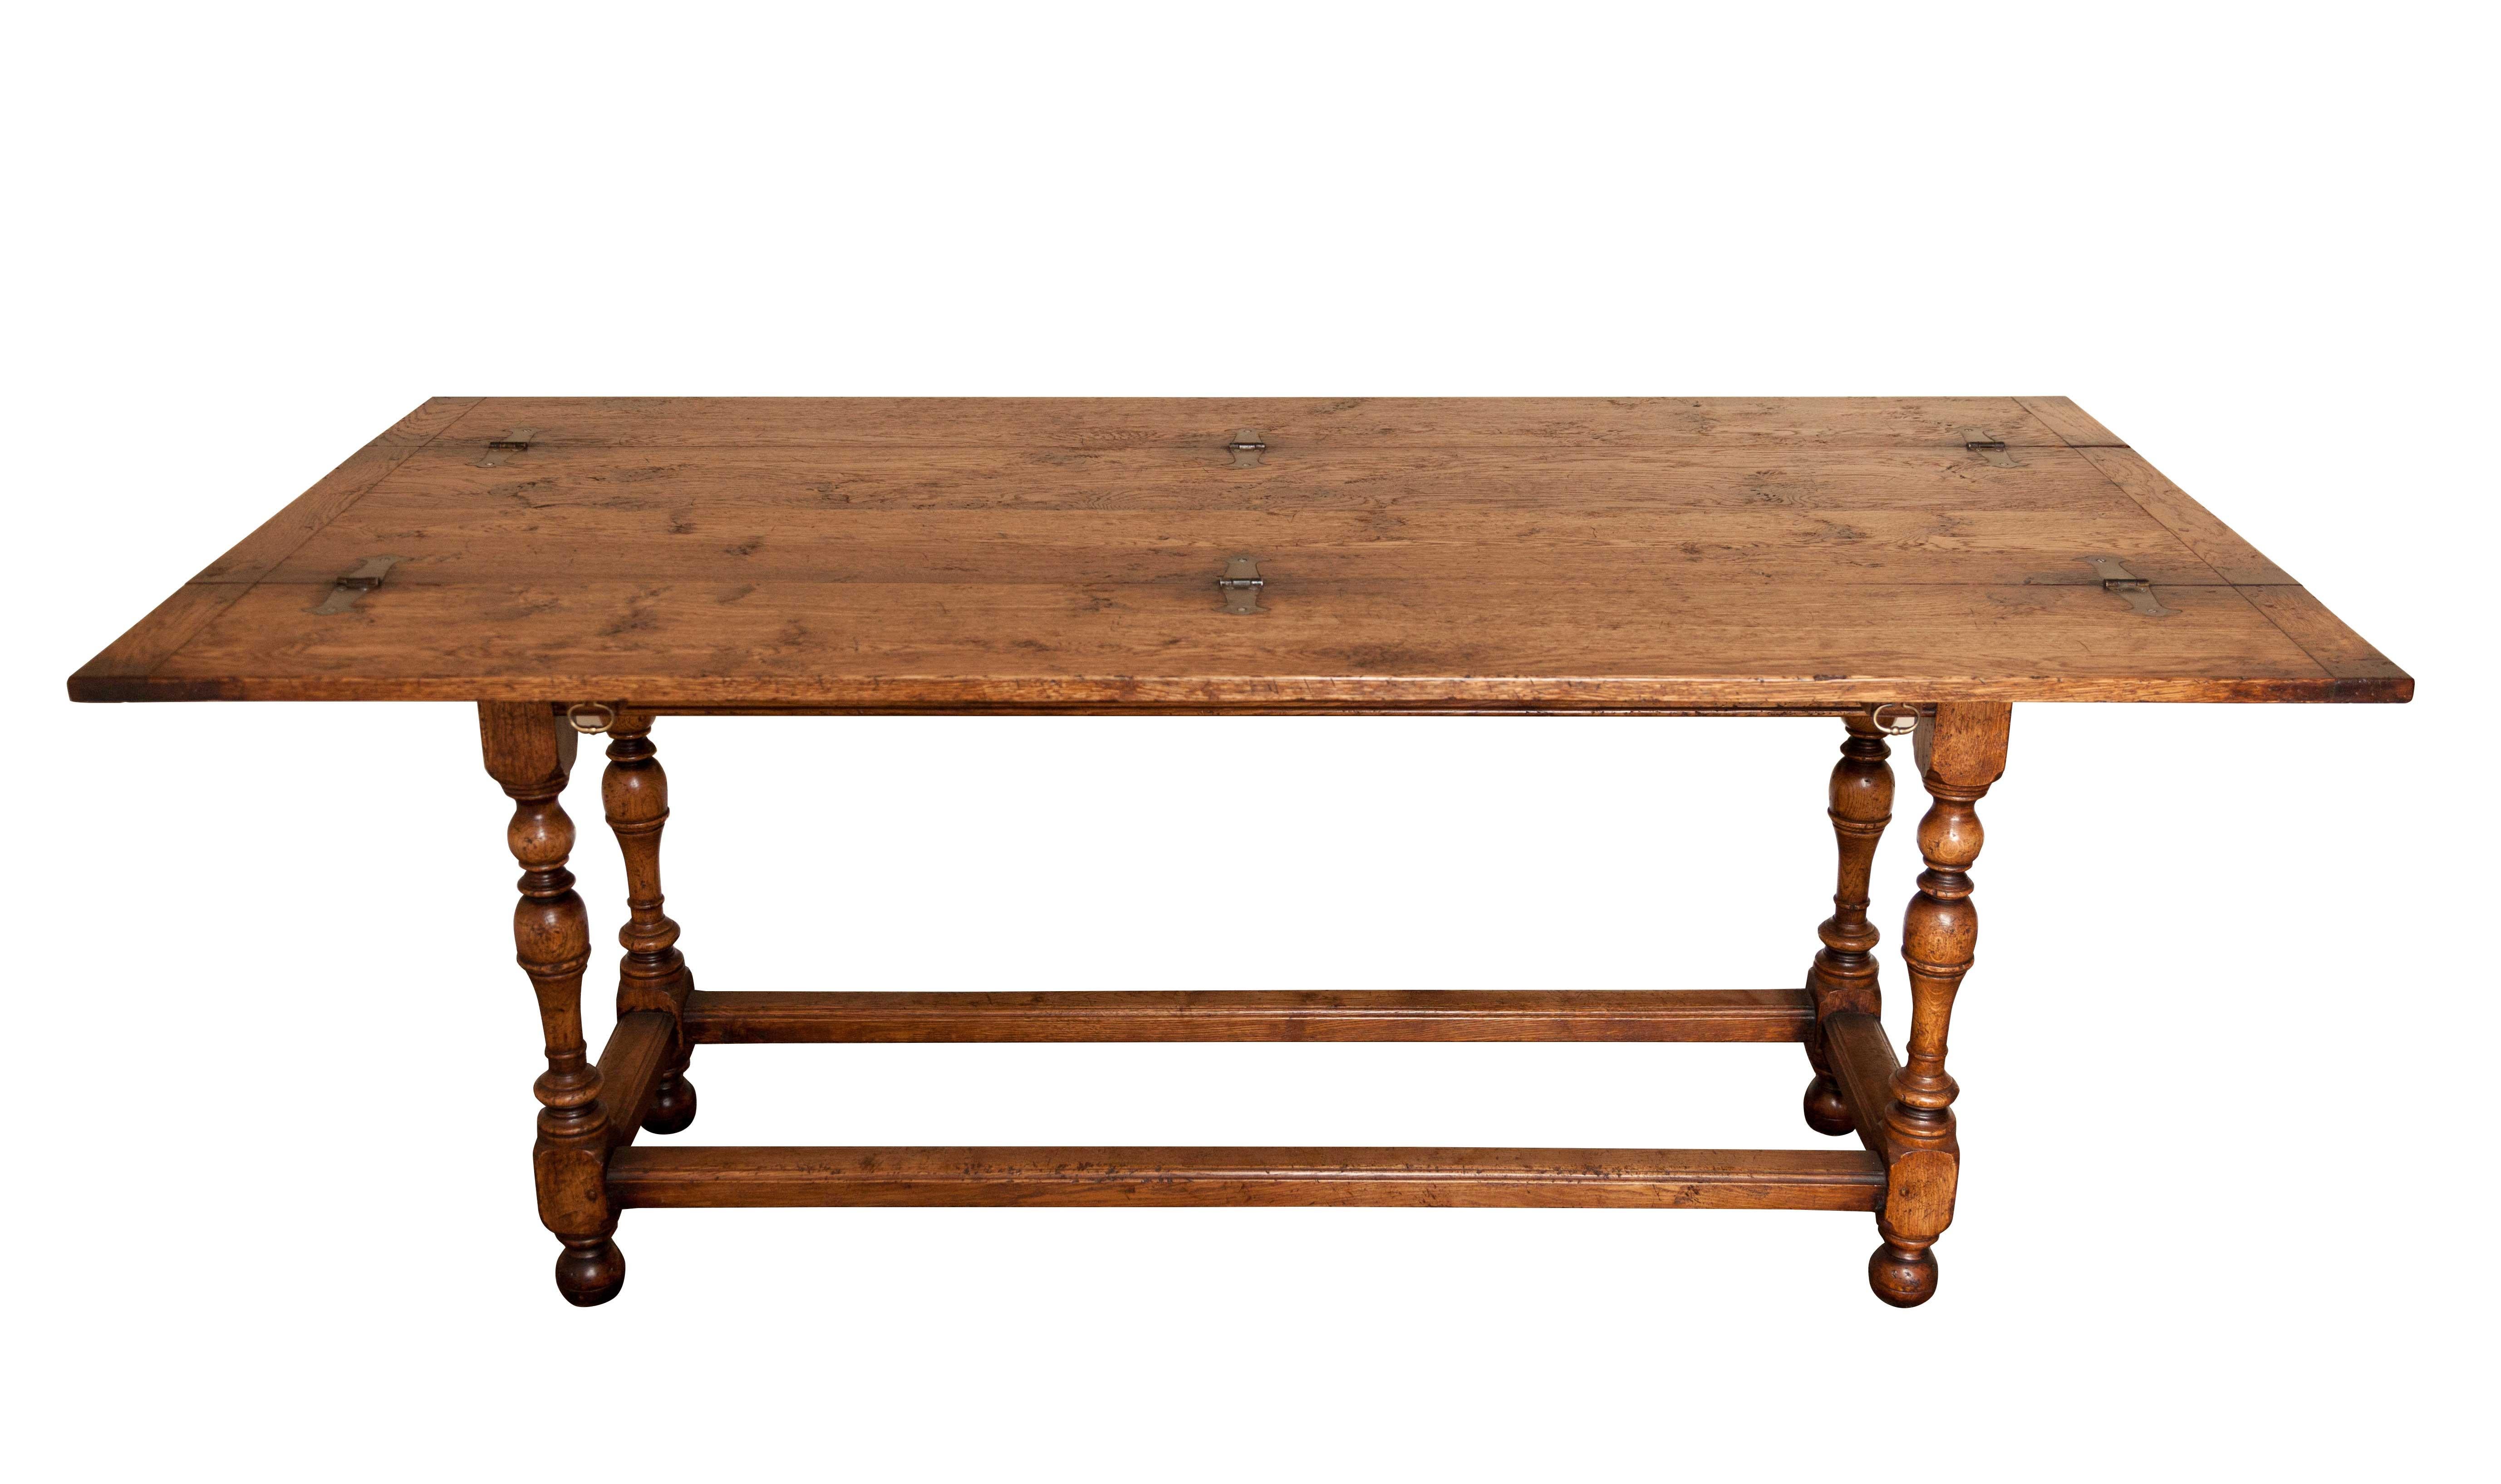 Handmade oak hall or serving table that opens into a dining table.
The fold over leaves open for a good sized dining table with leg room, with the leaves closed a nice side/entrance table.
The table top opens to show rustic hinges.
Made by